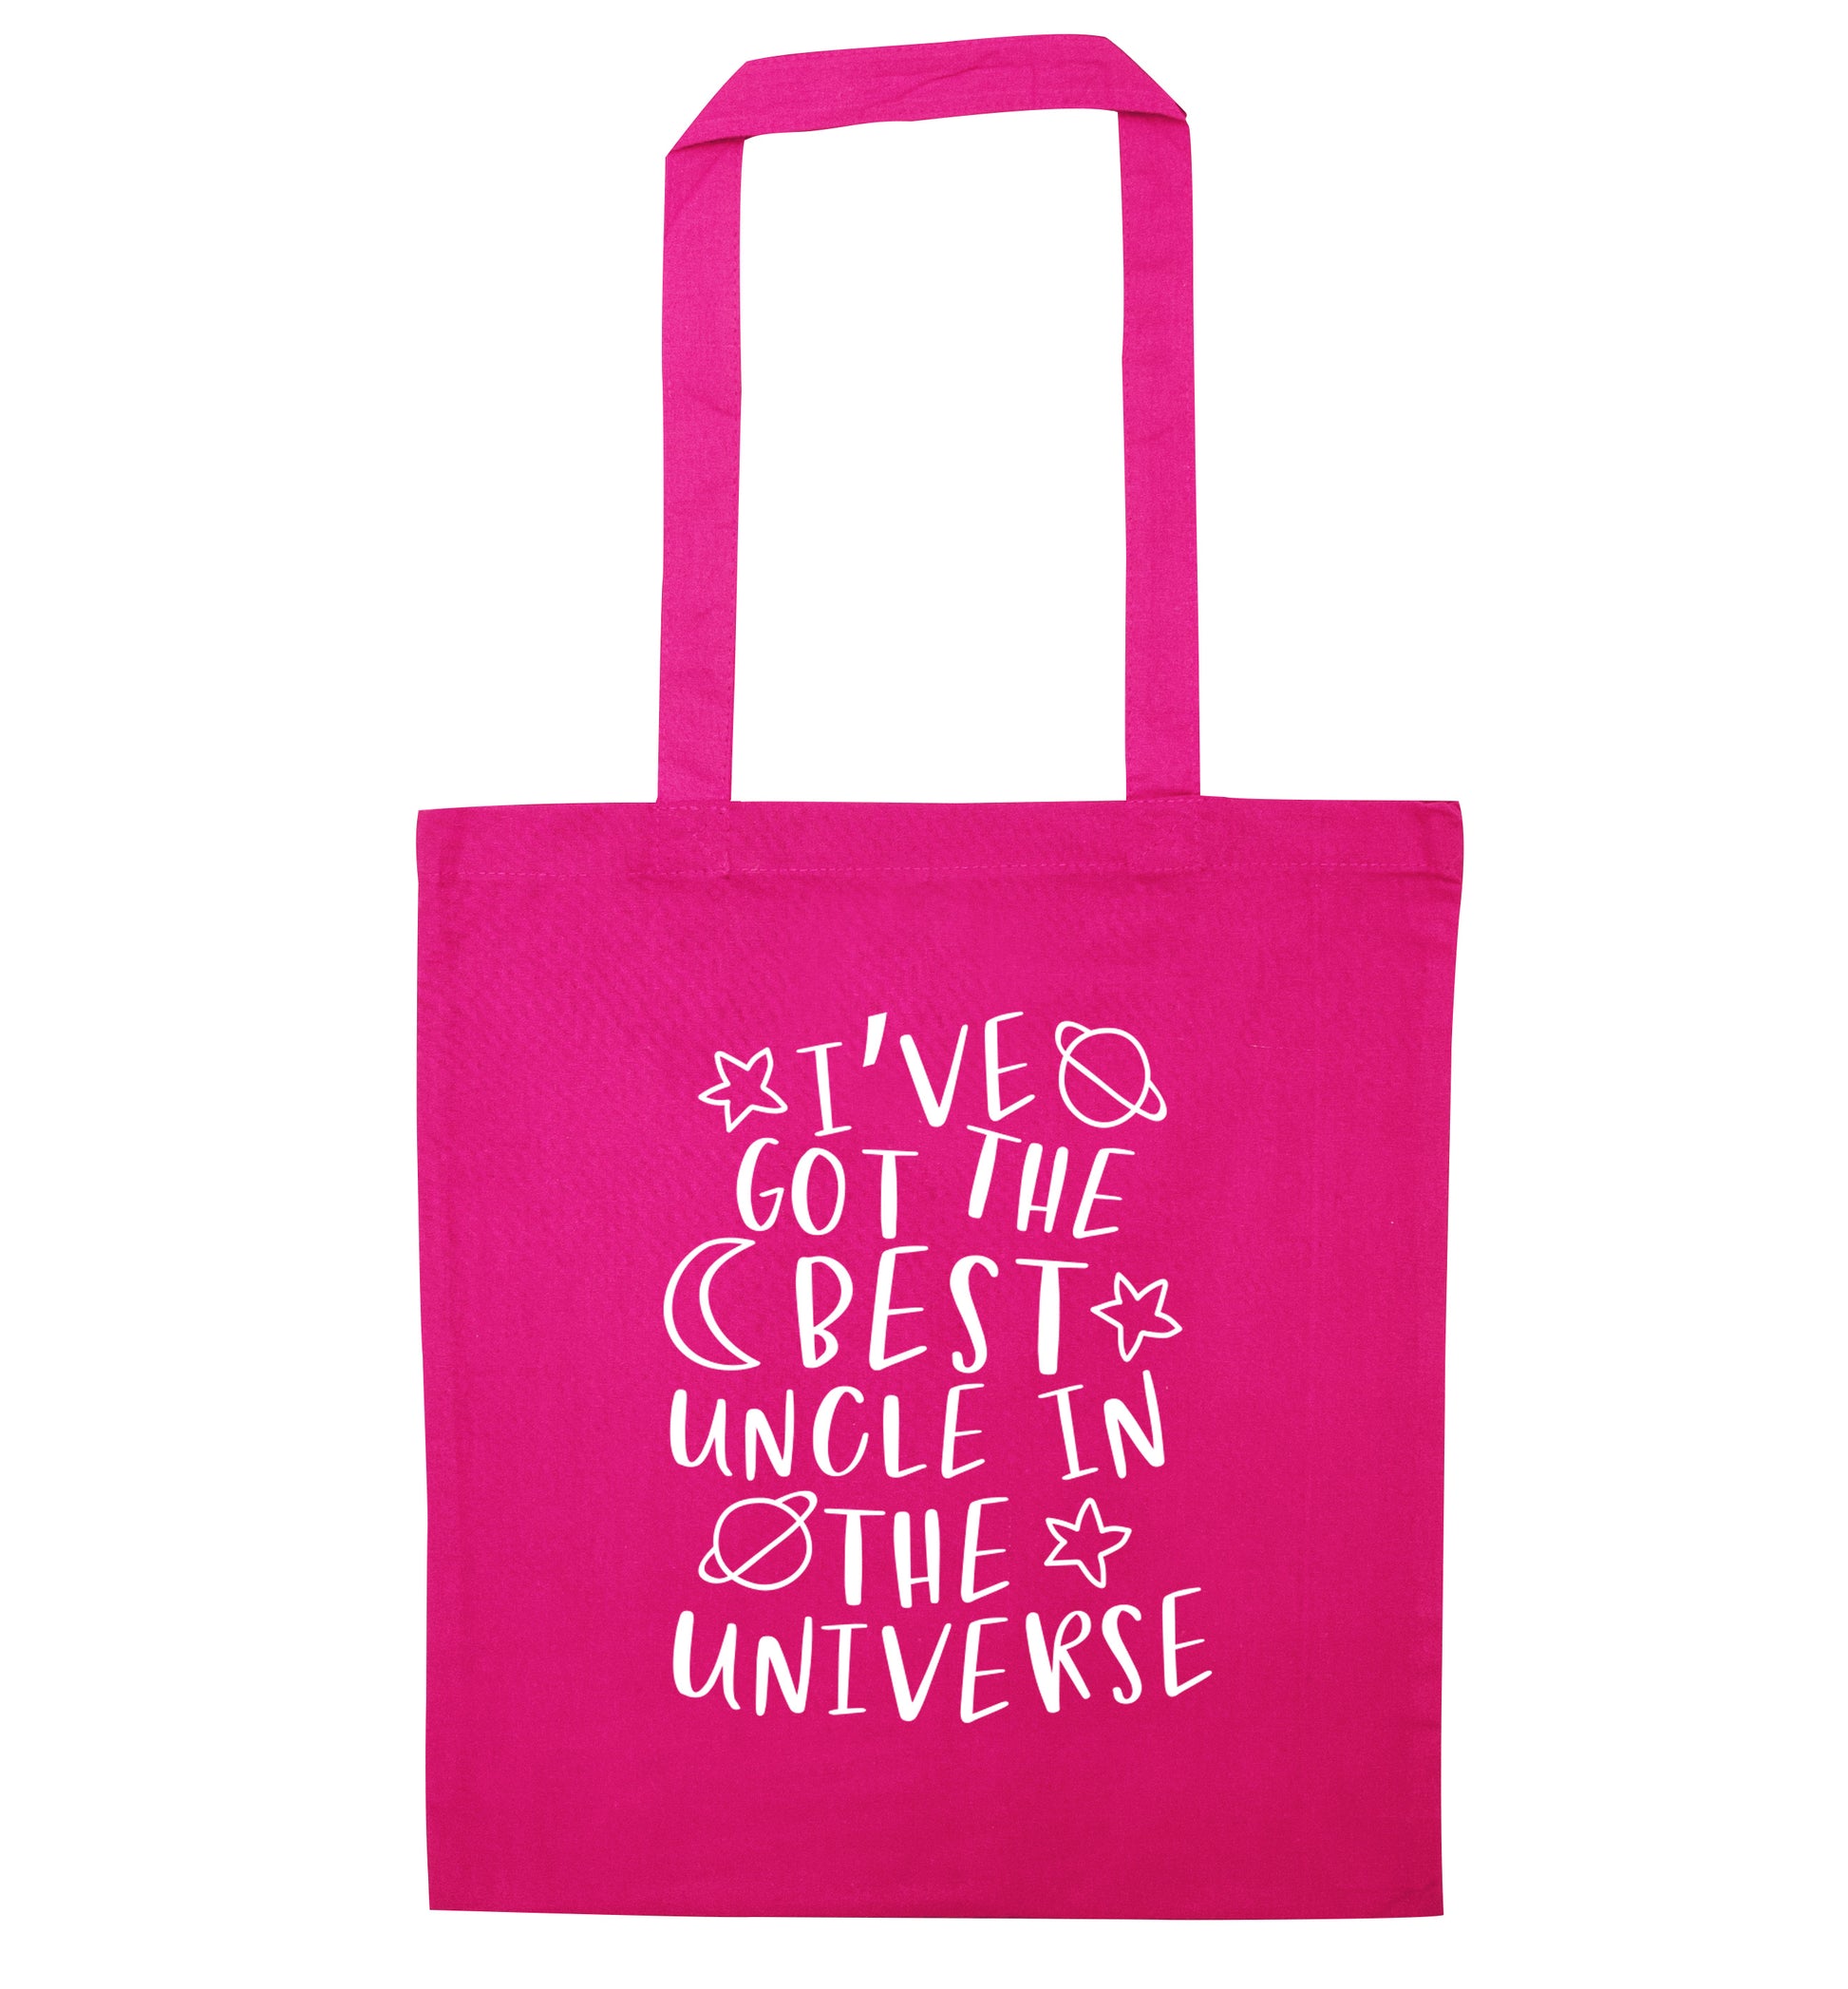 I've got the best uncle in the universe pink tote bag